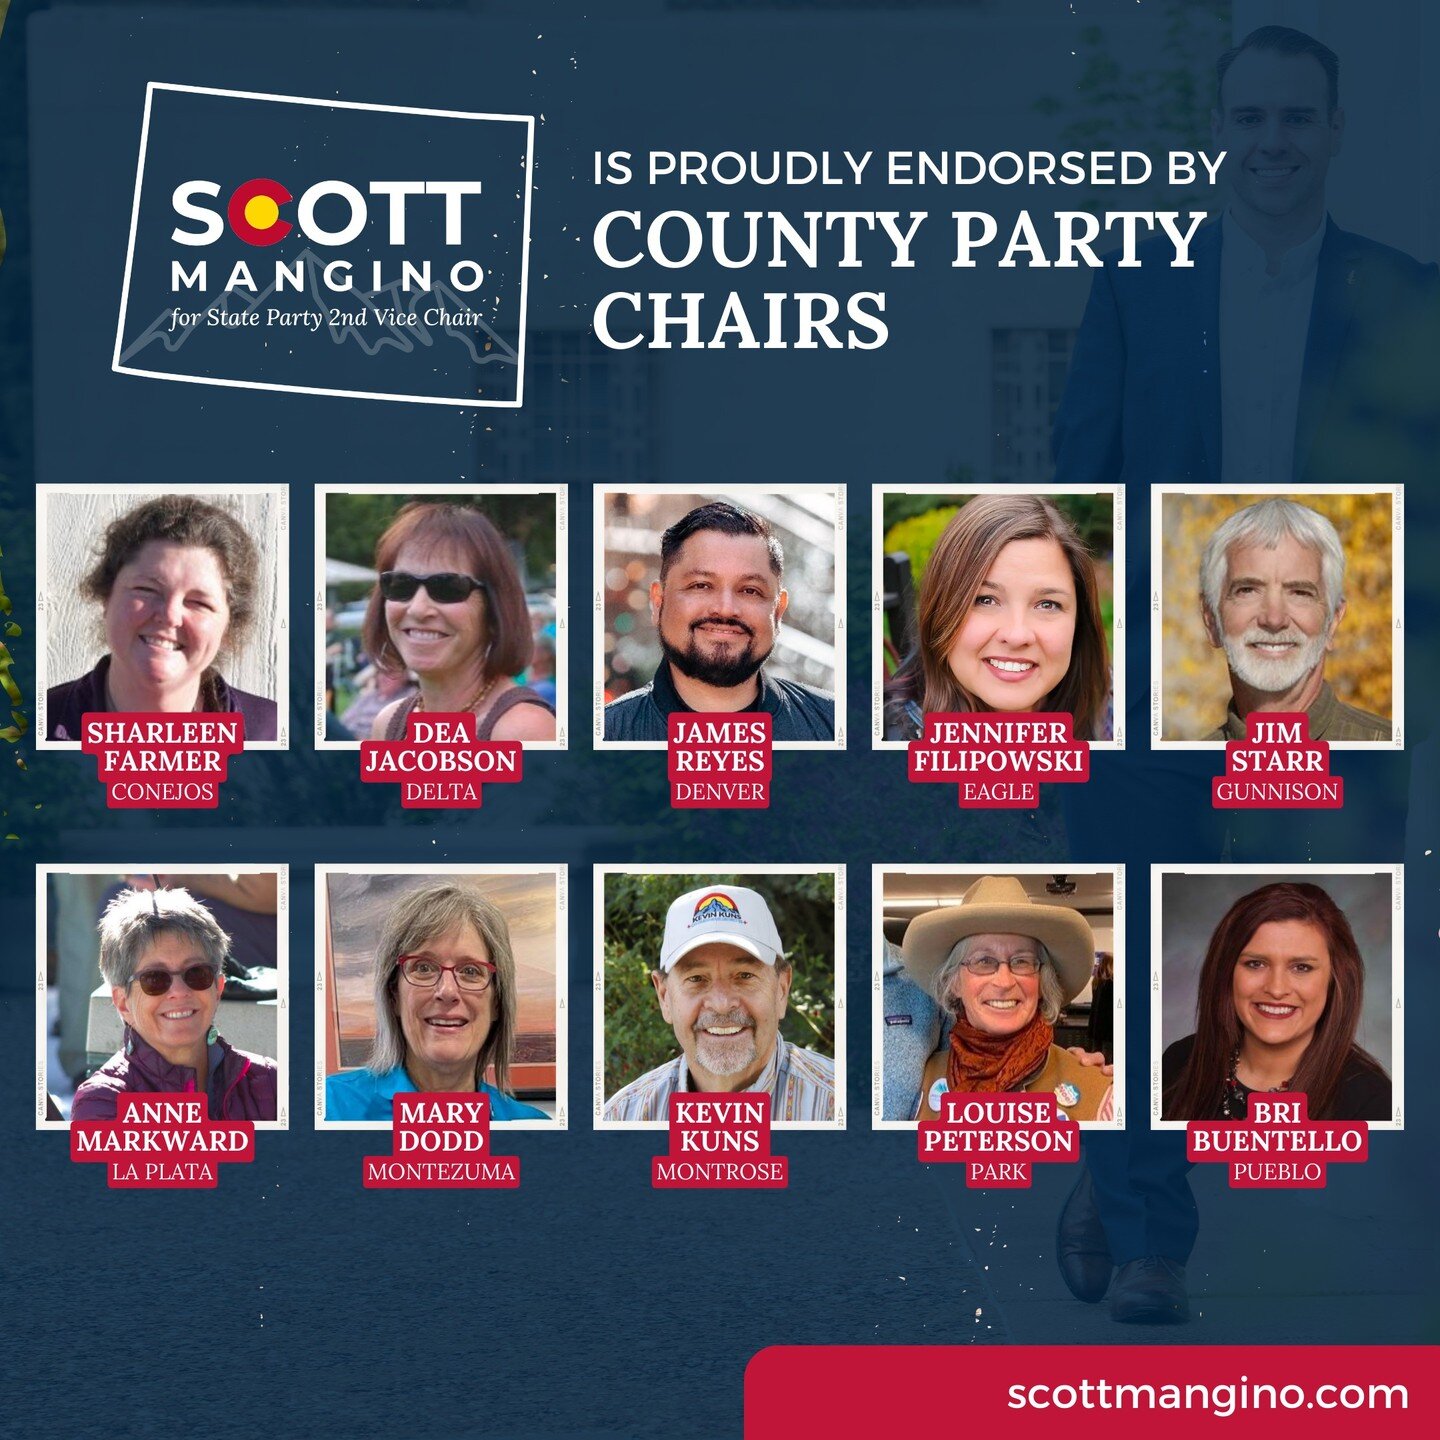 Grateful to receive the endorsement of these exceptional County Party Chairs! Our county parties are the backbone of our movement. Their tireless efforts to advance our values - striving for a fair and equitable Colorado are unparalleled. Their work 